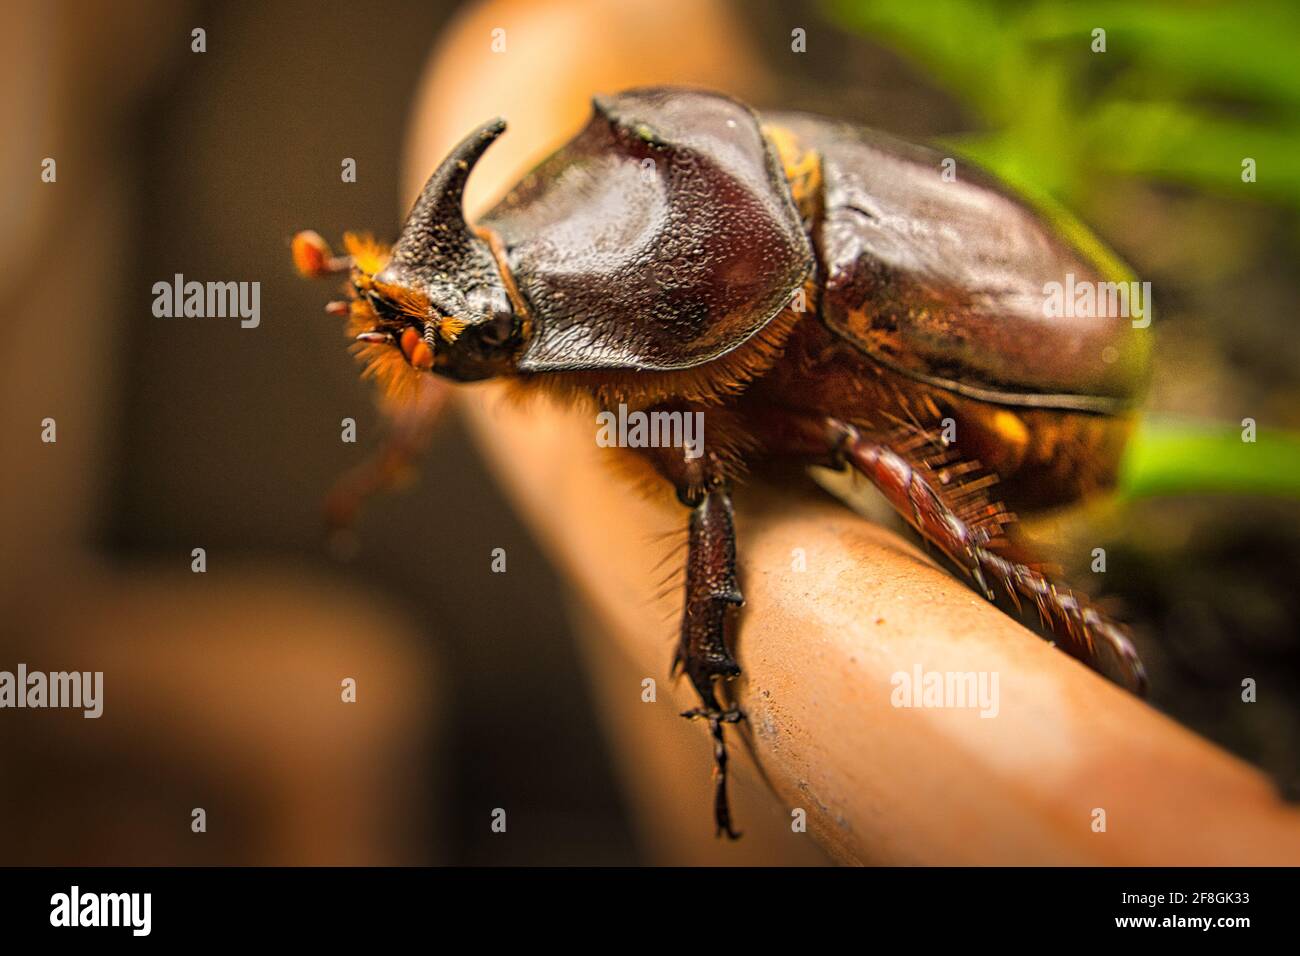 The rhinoceros beetle is a 'specially protected' species in Germany Stock Photo